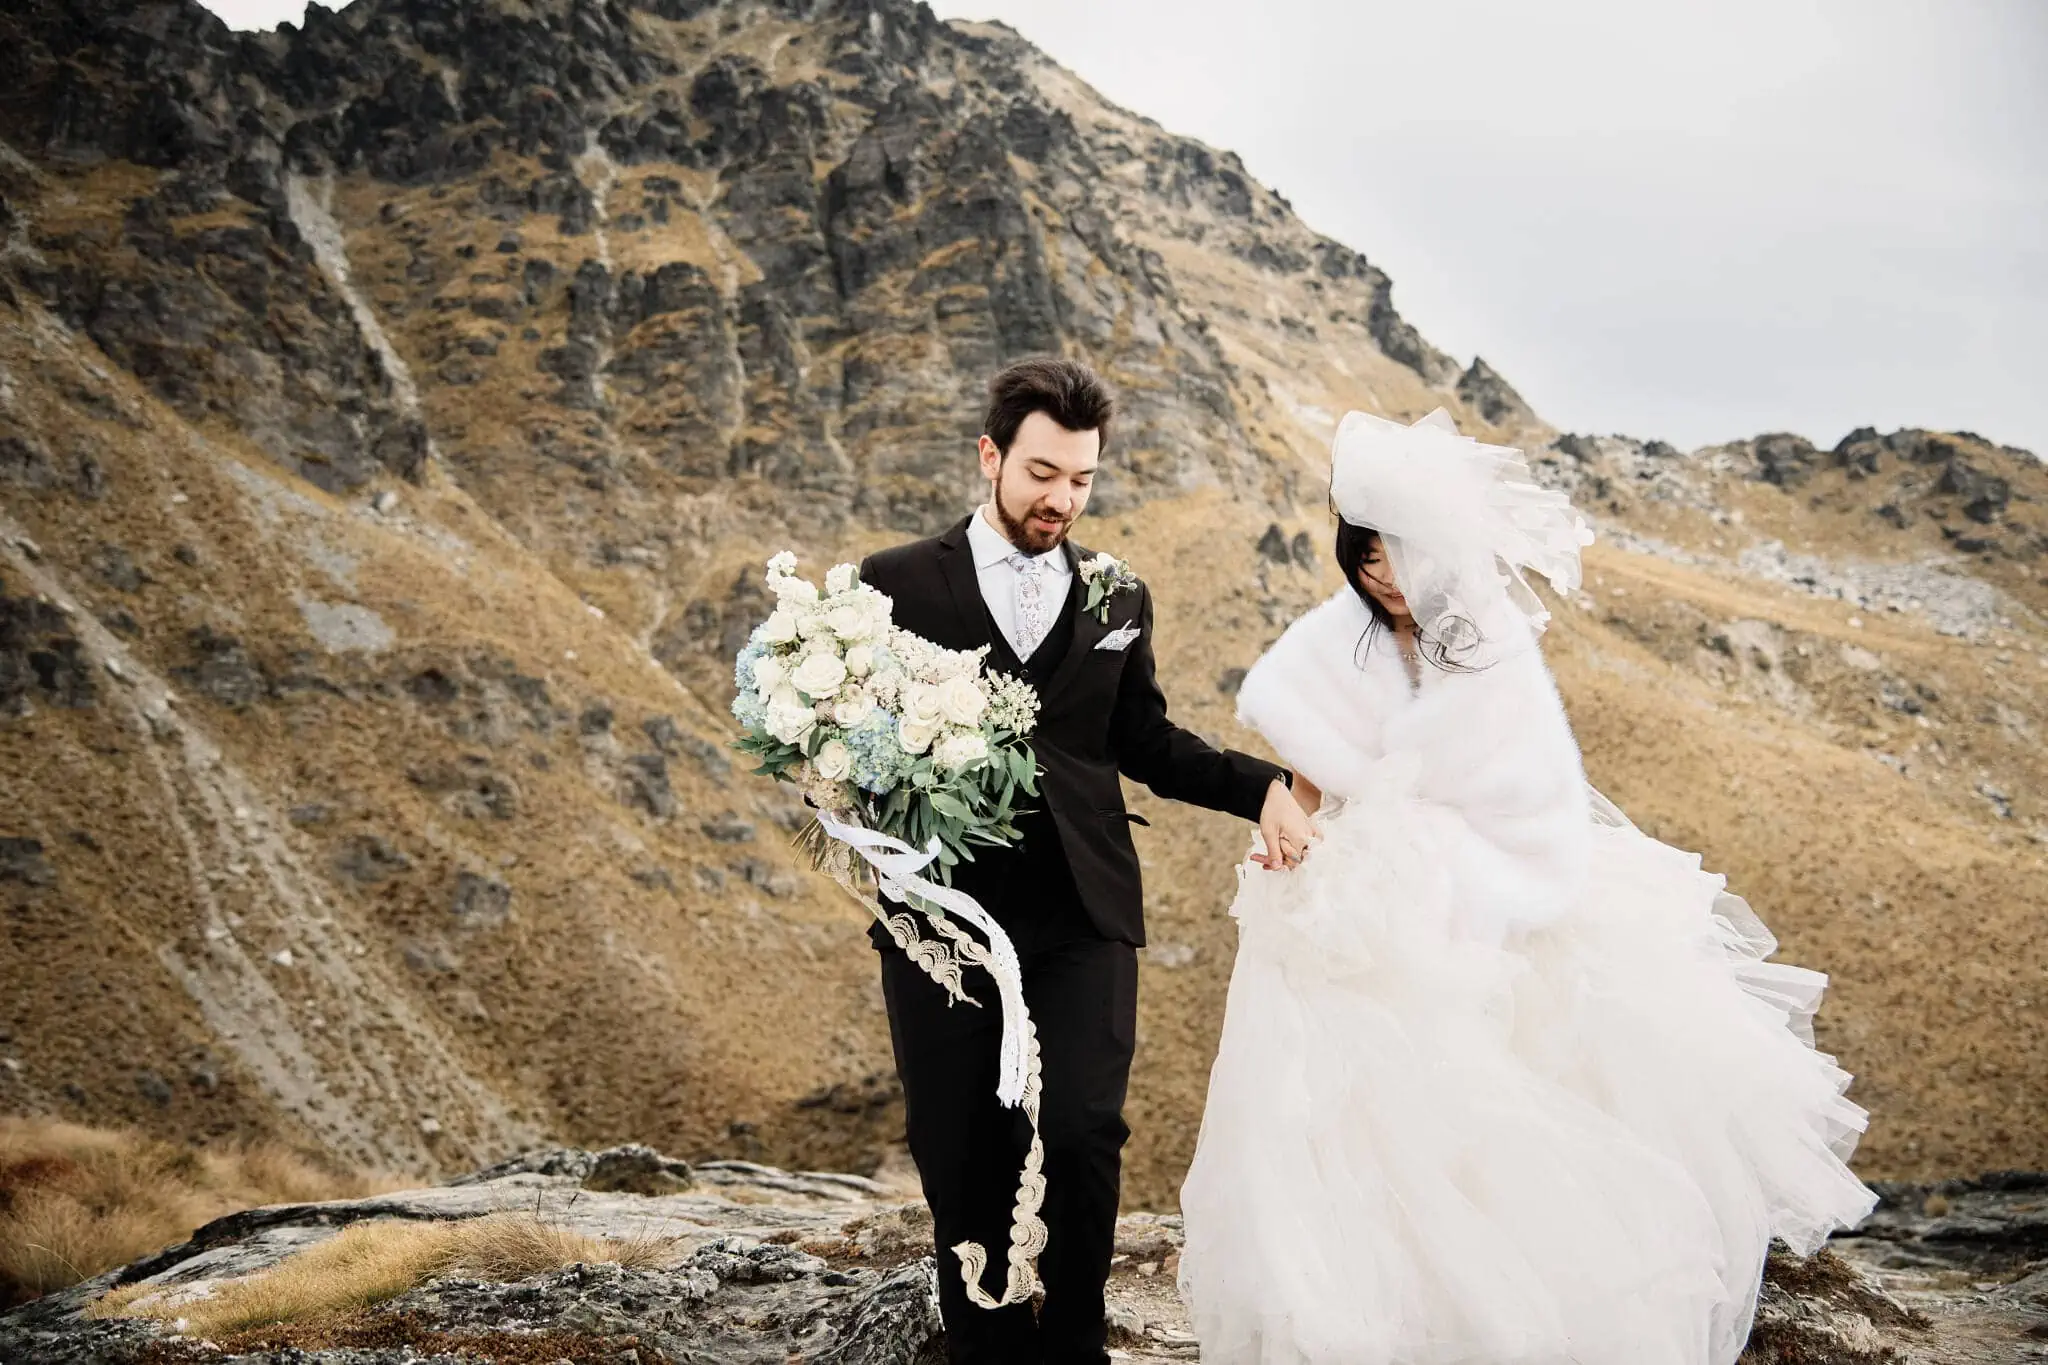 Carlos and Wanzhu's intimate heli elopement wedding on Cecil Peak mountain.